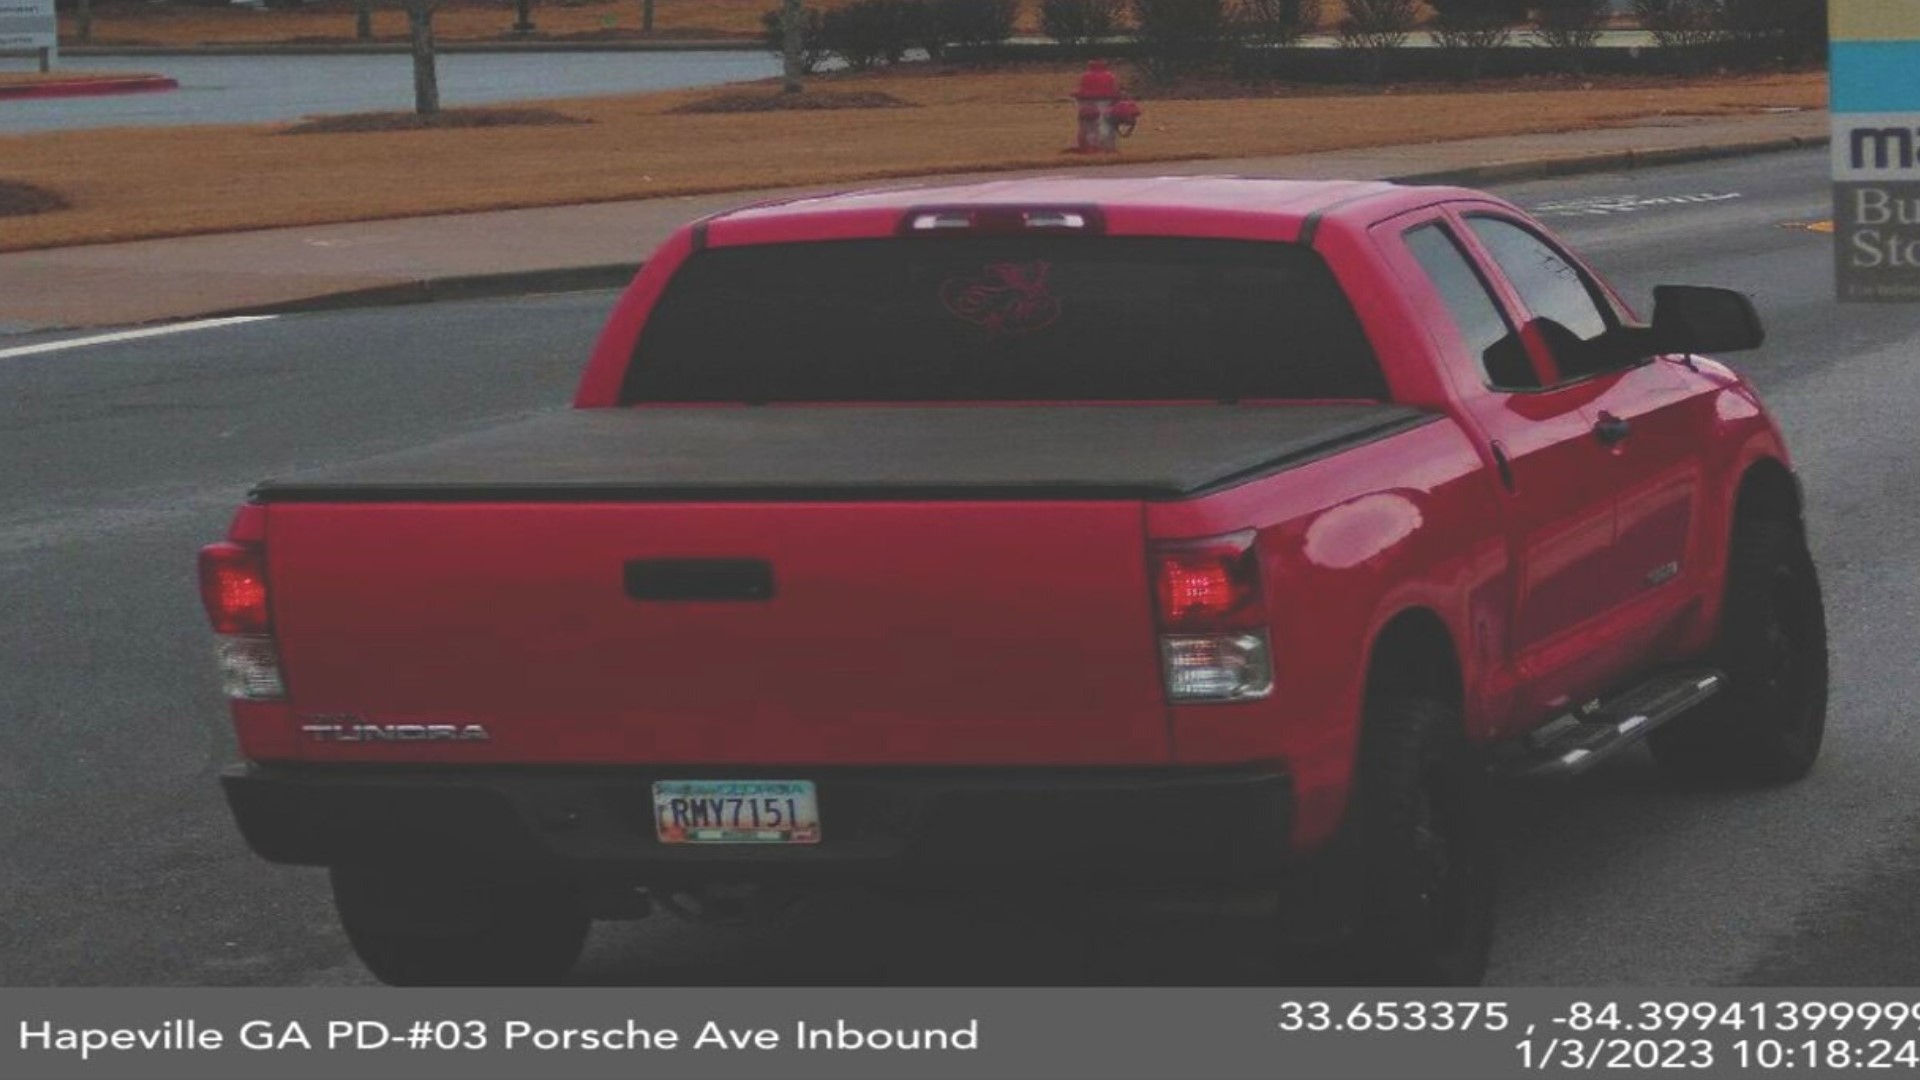 Investigators with APD's Accident Investigations Unit said they're looking for a 2011 Red Toyota Tundra with the Georgia license plate: RMY7151.